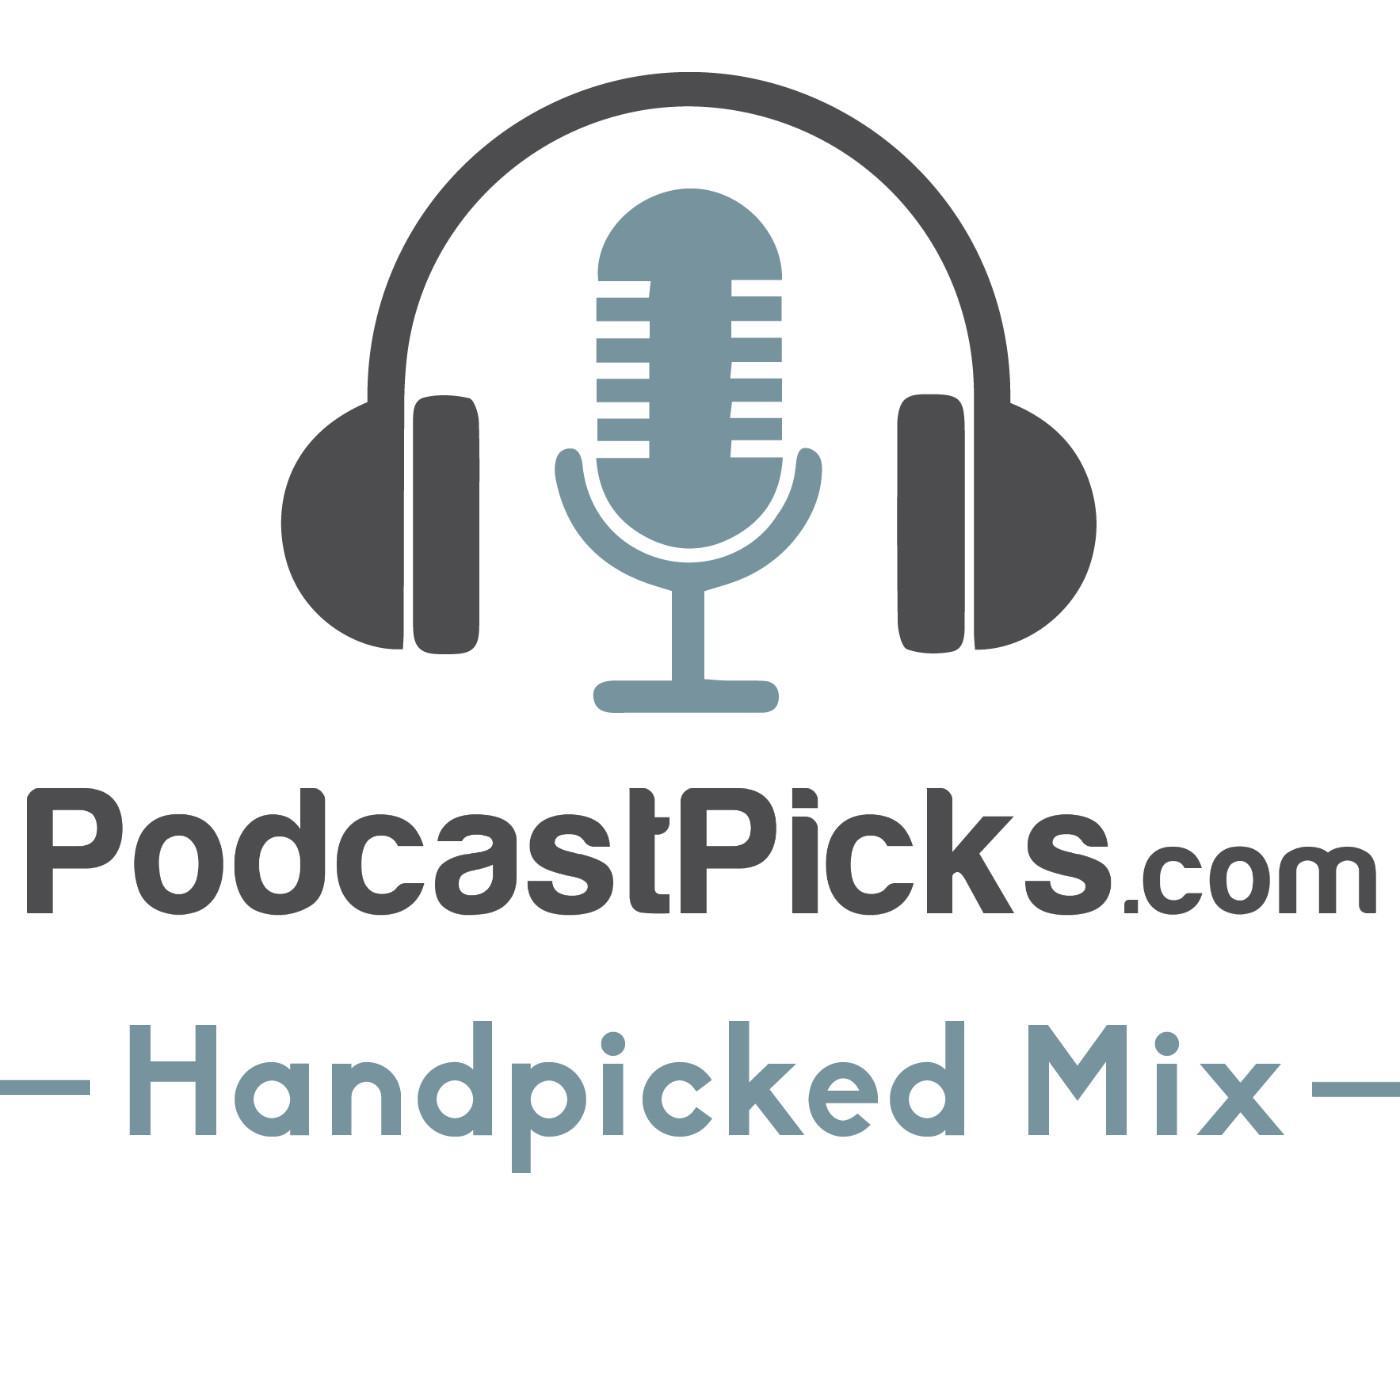 Audio worth listening to, curated by real people. Subscribe to the Handpicked Mix feed to get the most interesting podcast episodes automatically on your player